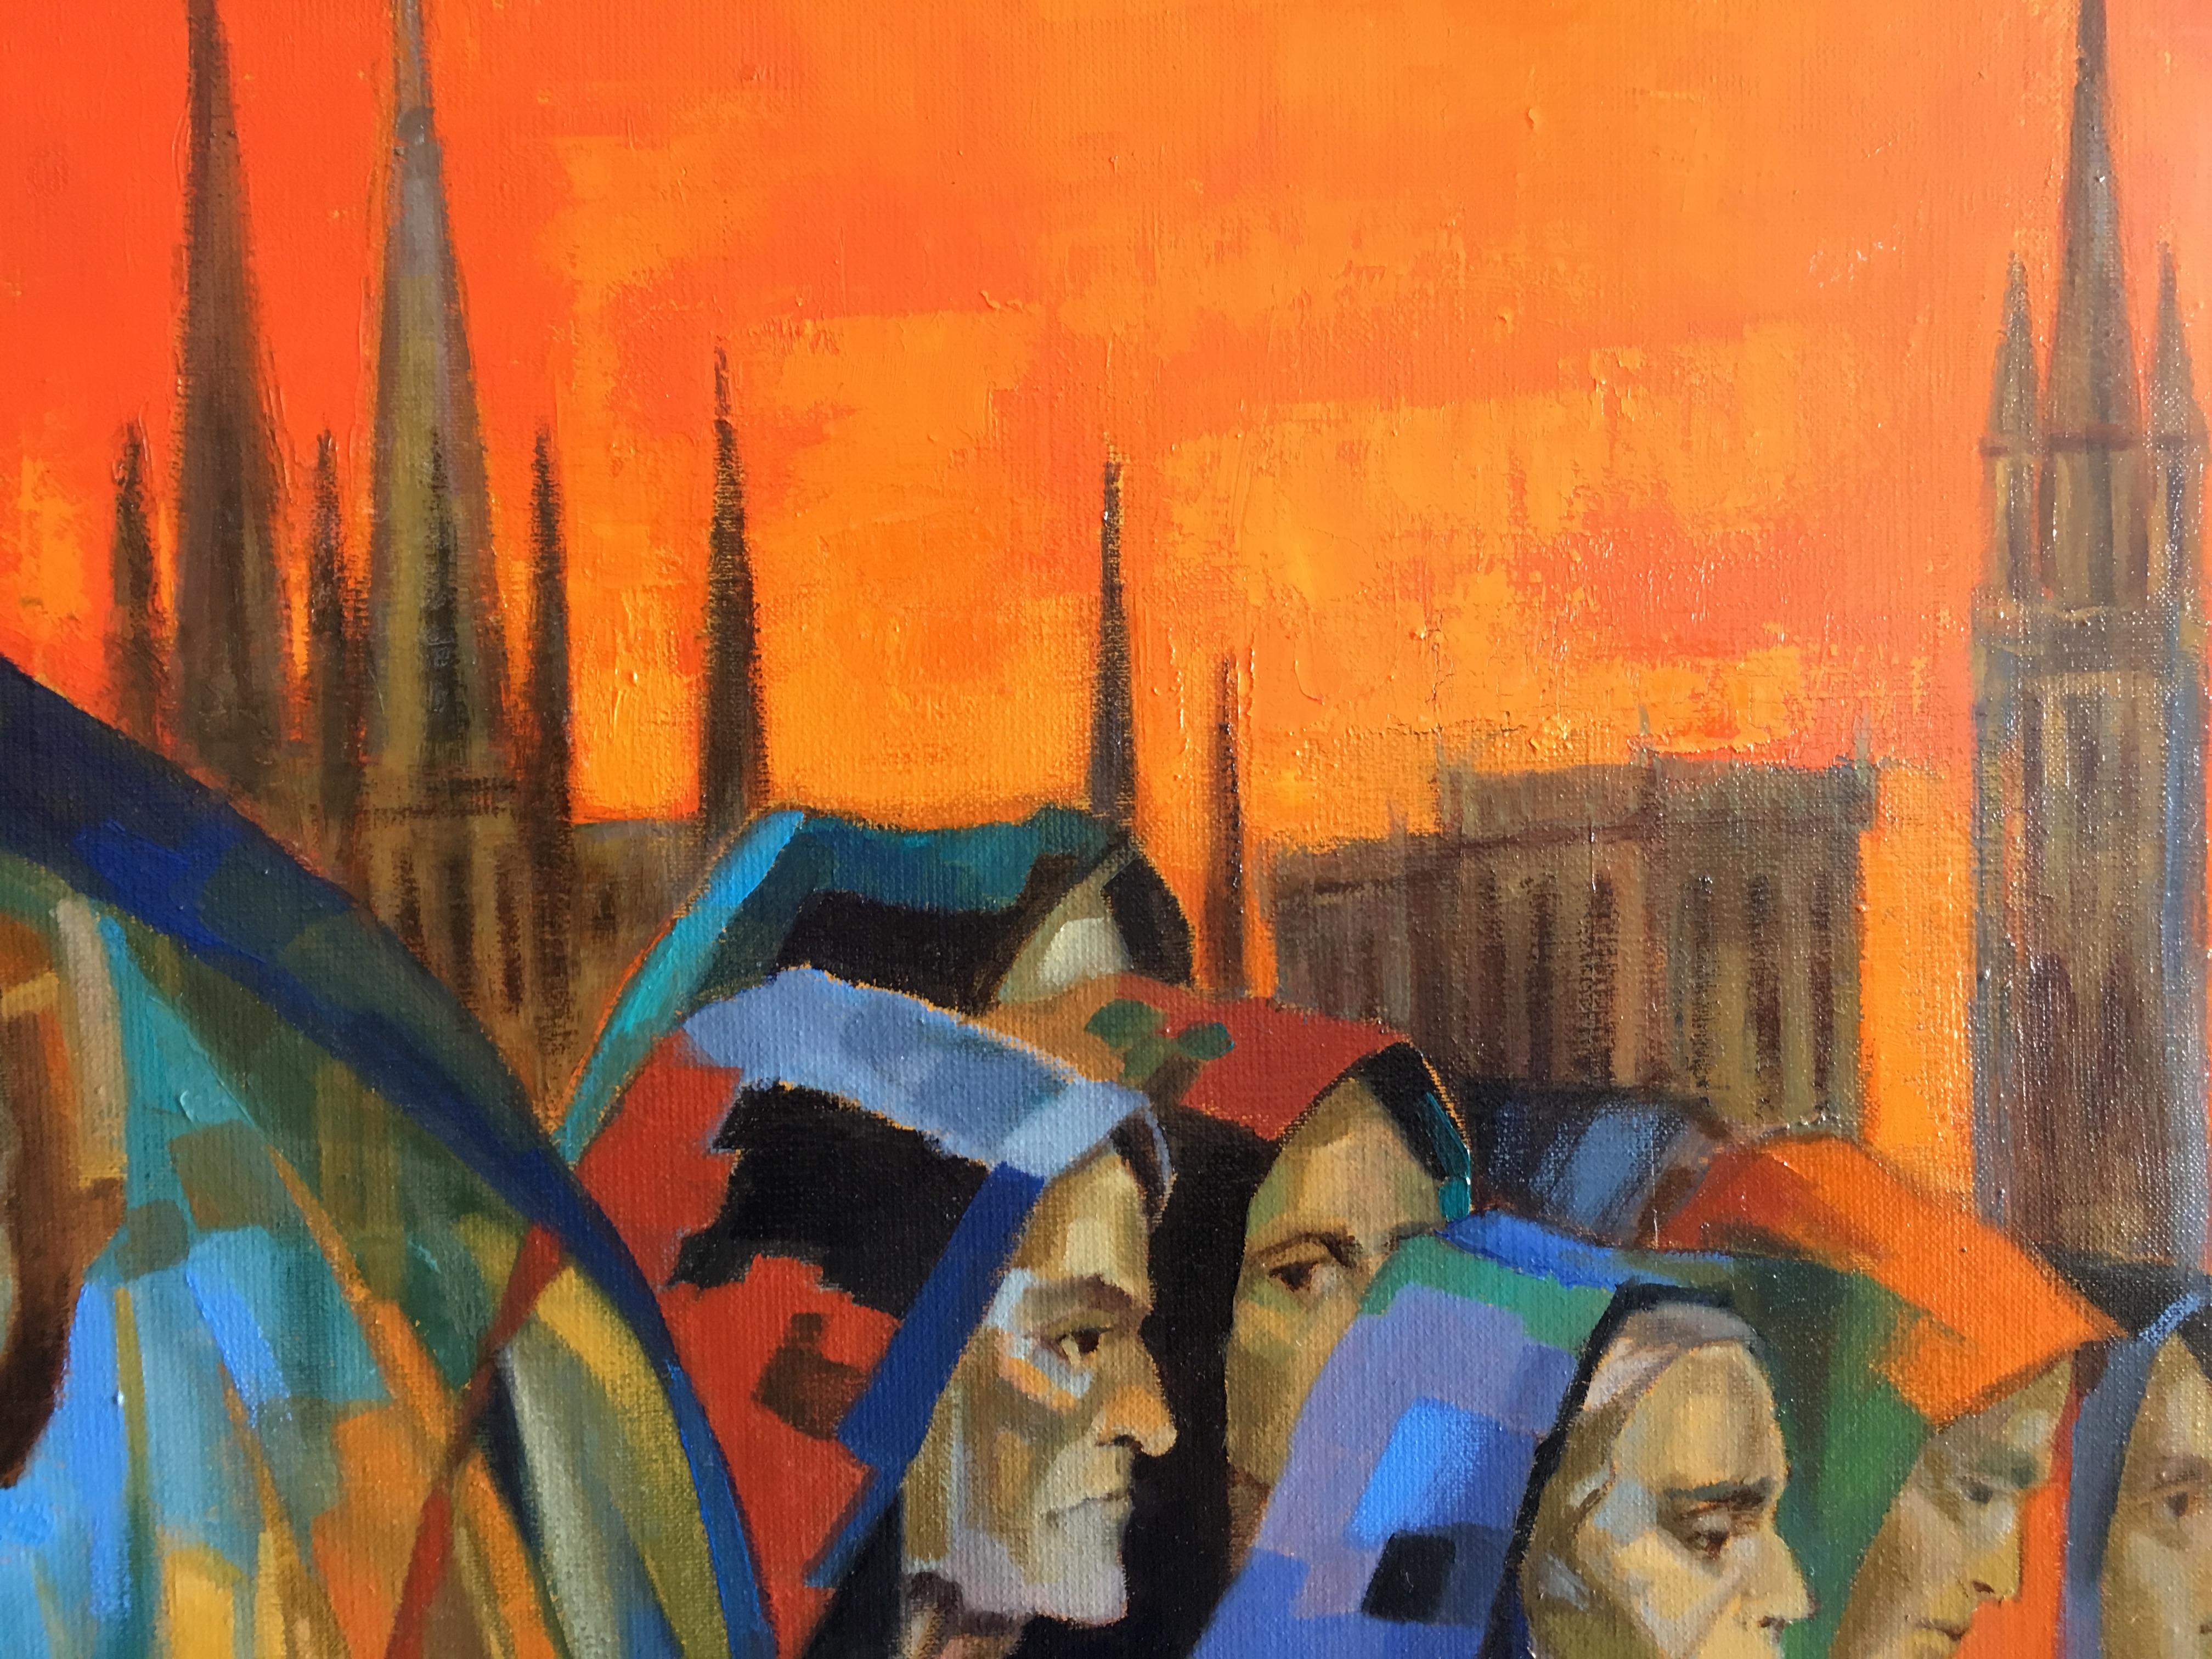 The procession, Oil on canvas Expressionist Style Red Orange and Blue colors - Brown Portrait Painting by Jori Duran